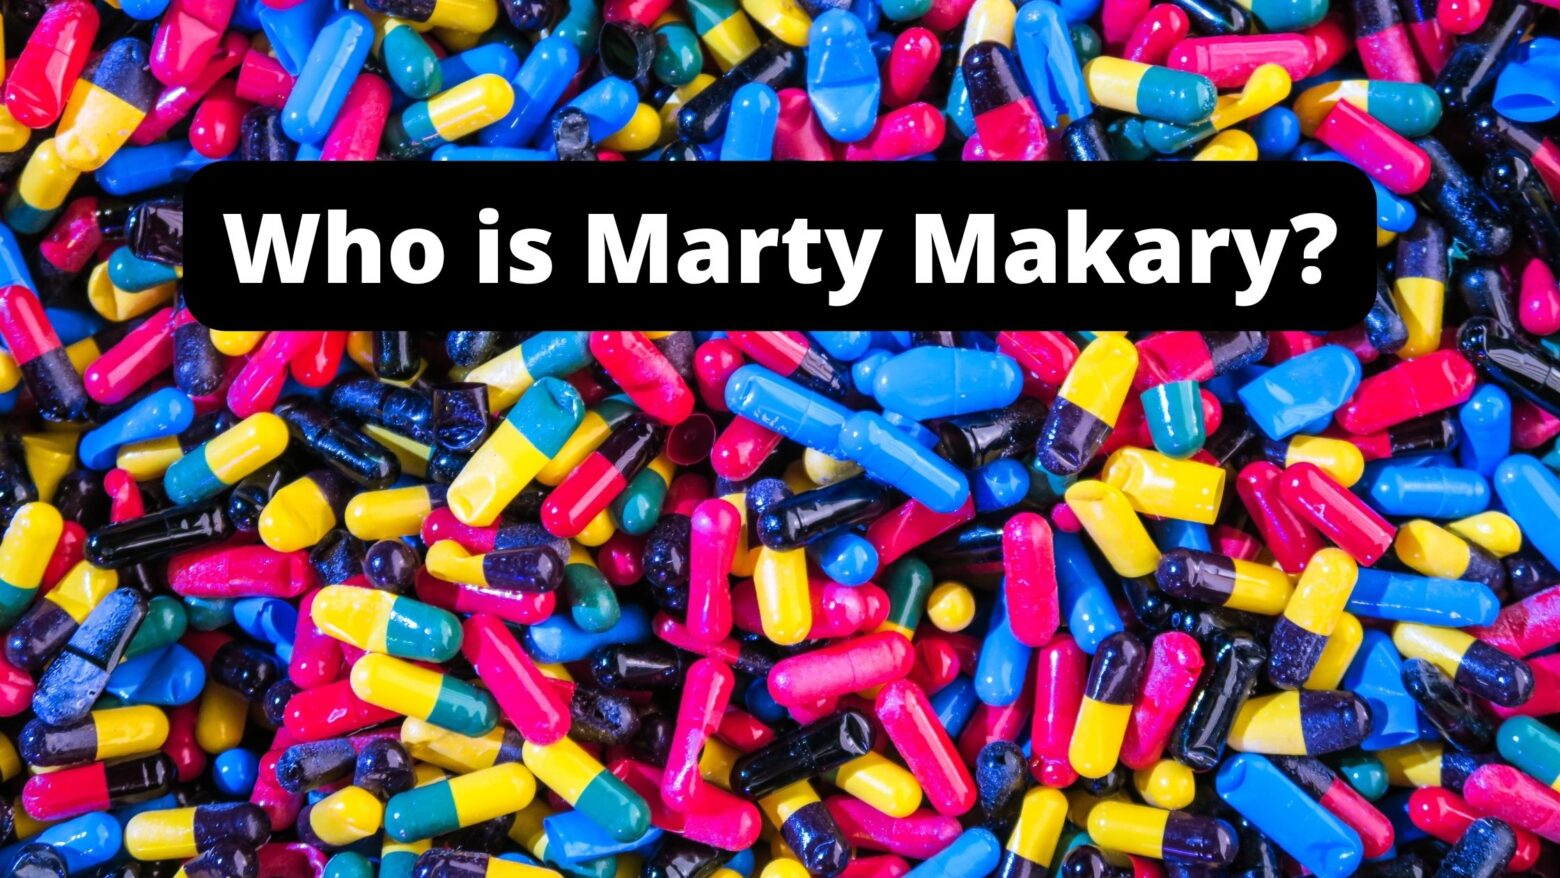 Who is Marty Makary?